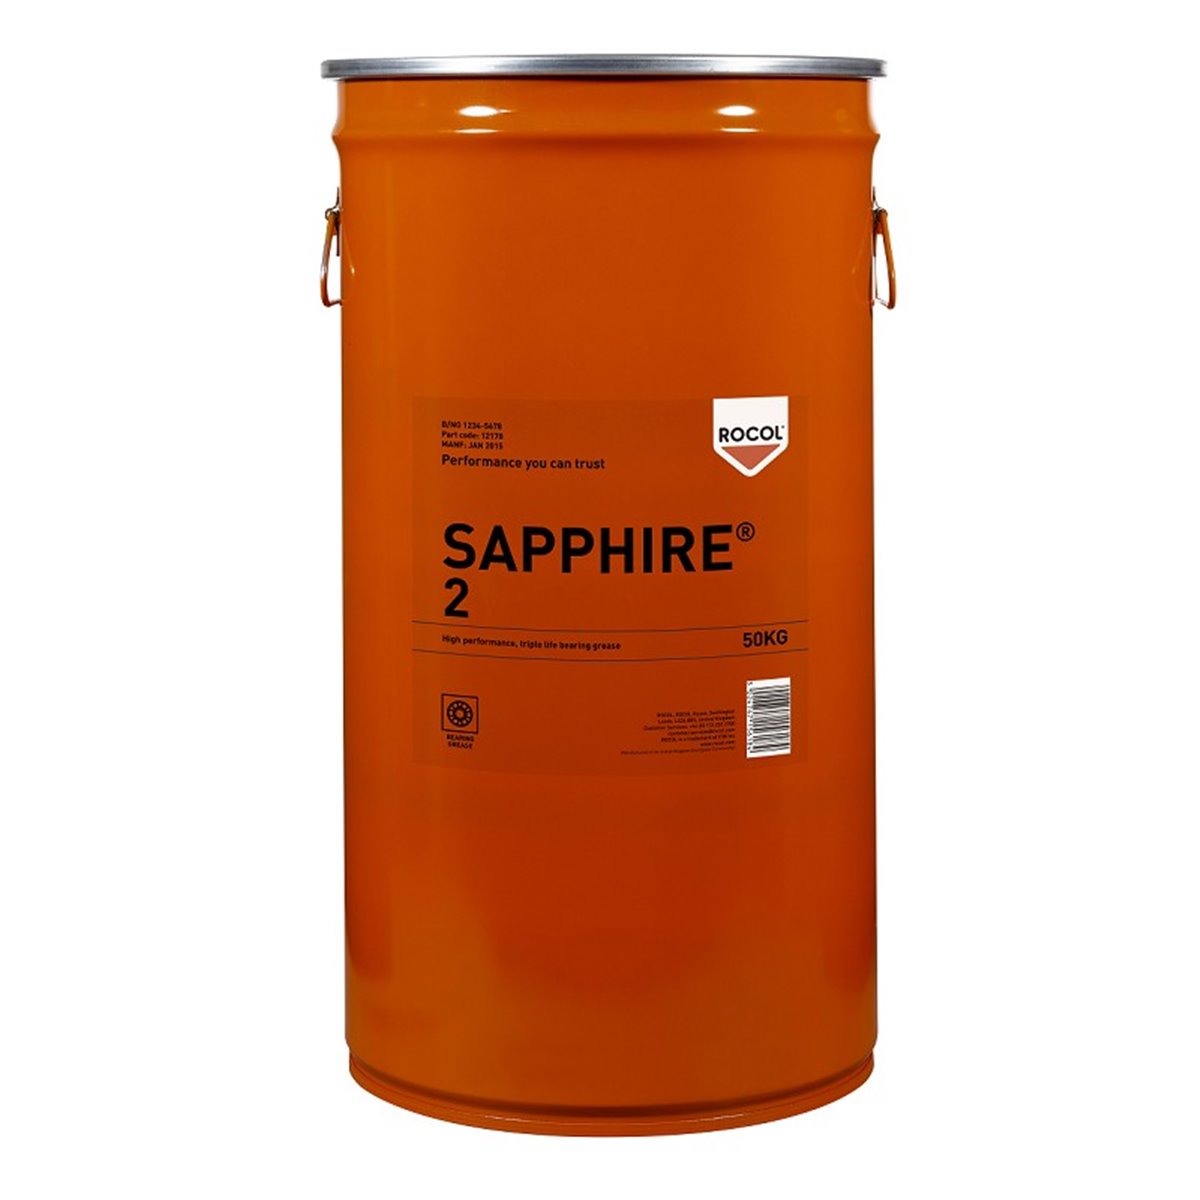 SAPPHIRE 2 BEARING GREASE Rocol 50kg RS12178